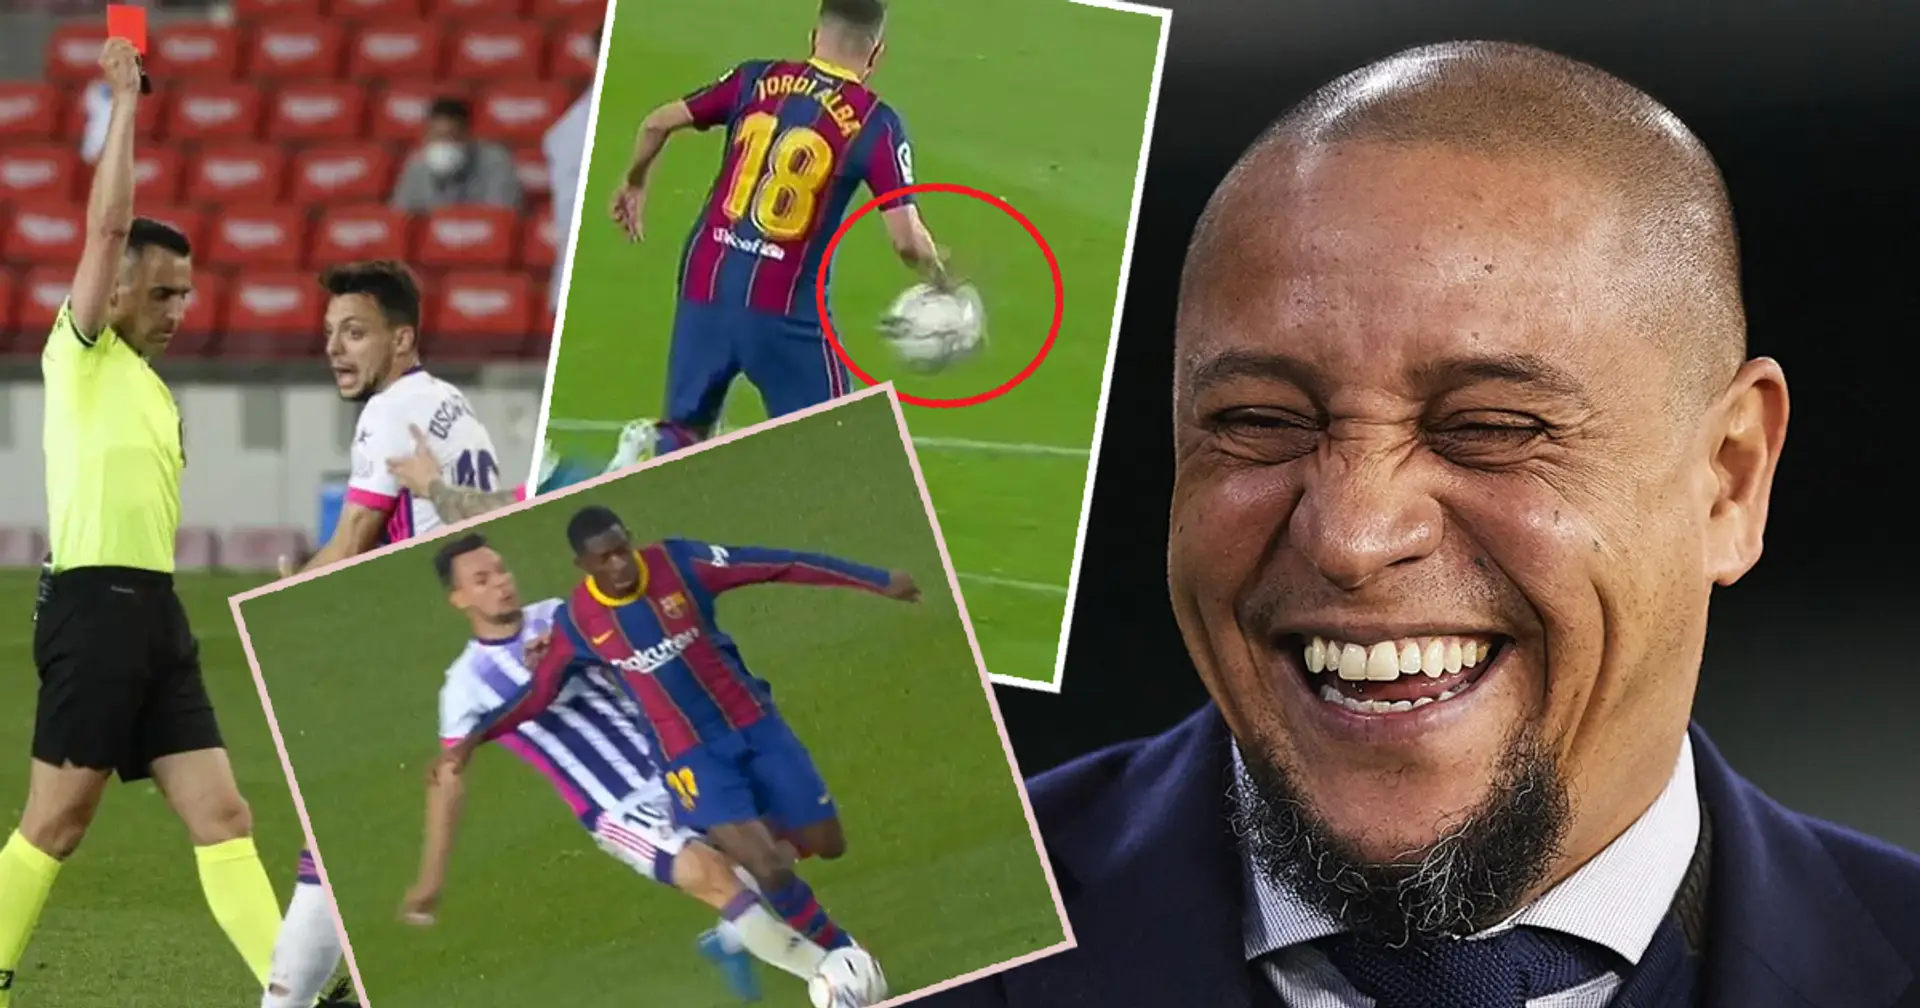 'This ref will be given a game this weekend as a prize': Roberto Carlos reacts to controversy in Barcelona's latest win